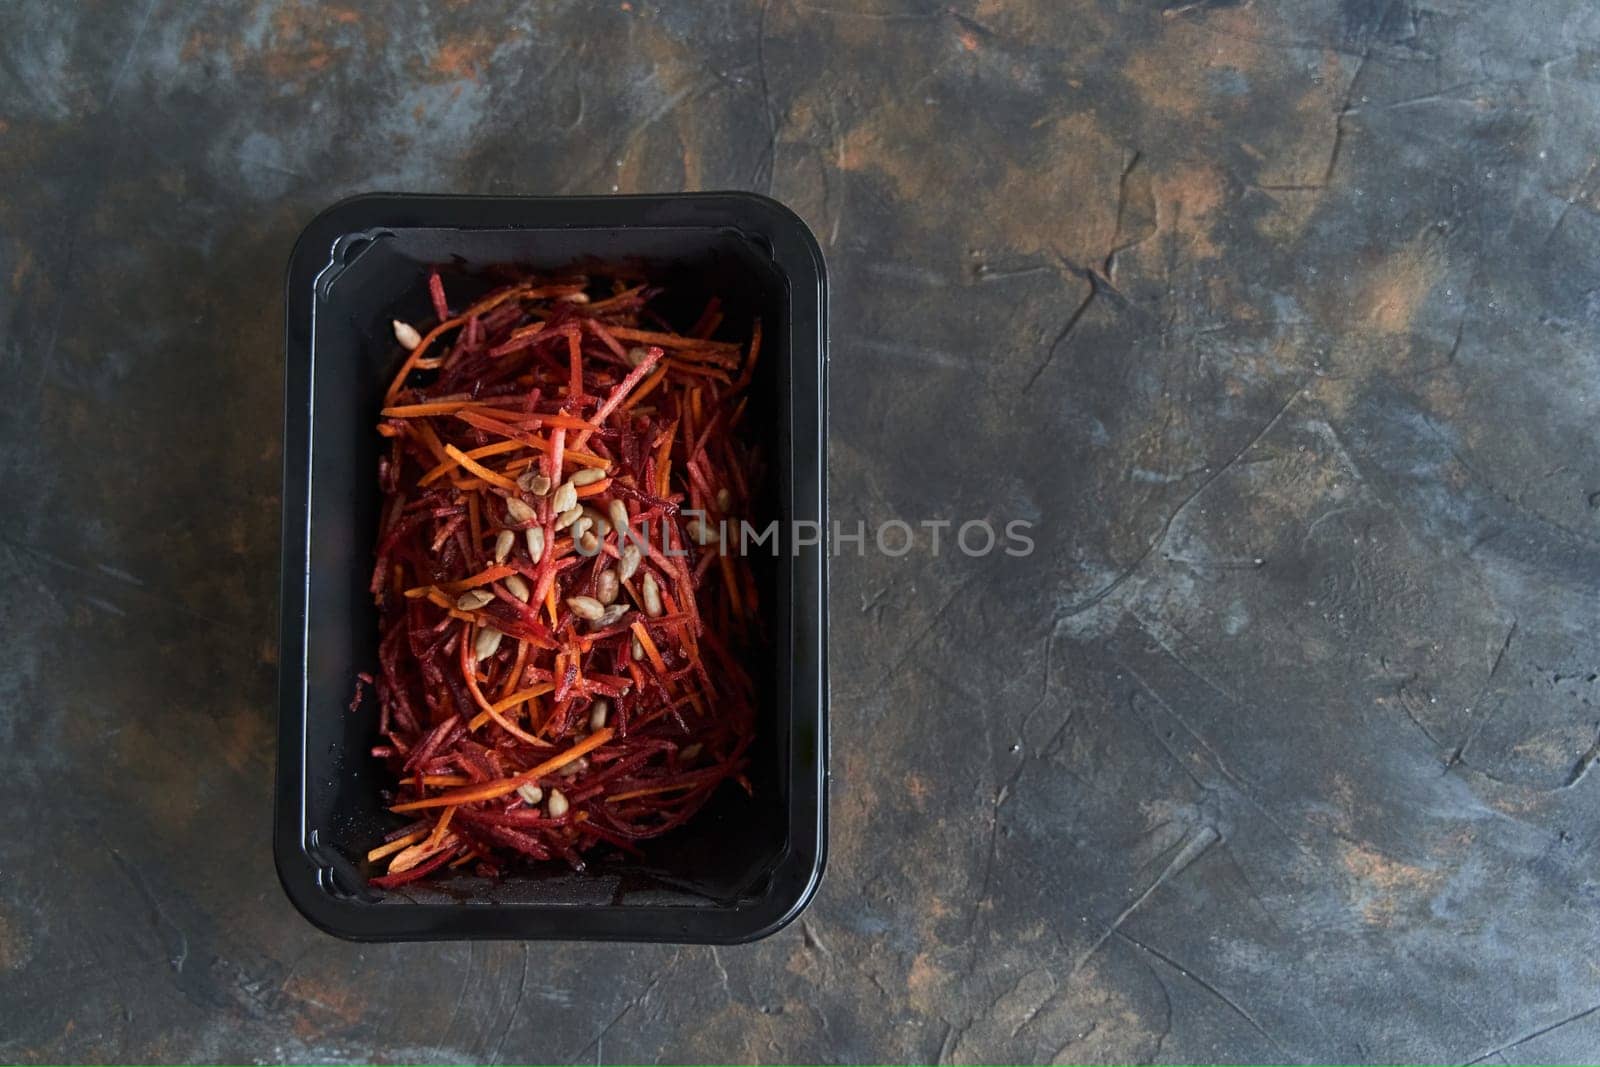 Dietary Salad with Beets and Carrots. Healthy diet. Diet for weight loss. Healthy food delivery in plastic containers. High quality photo